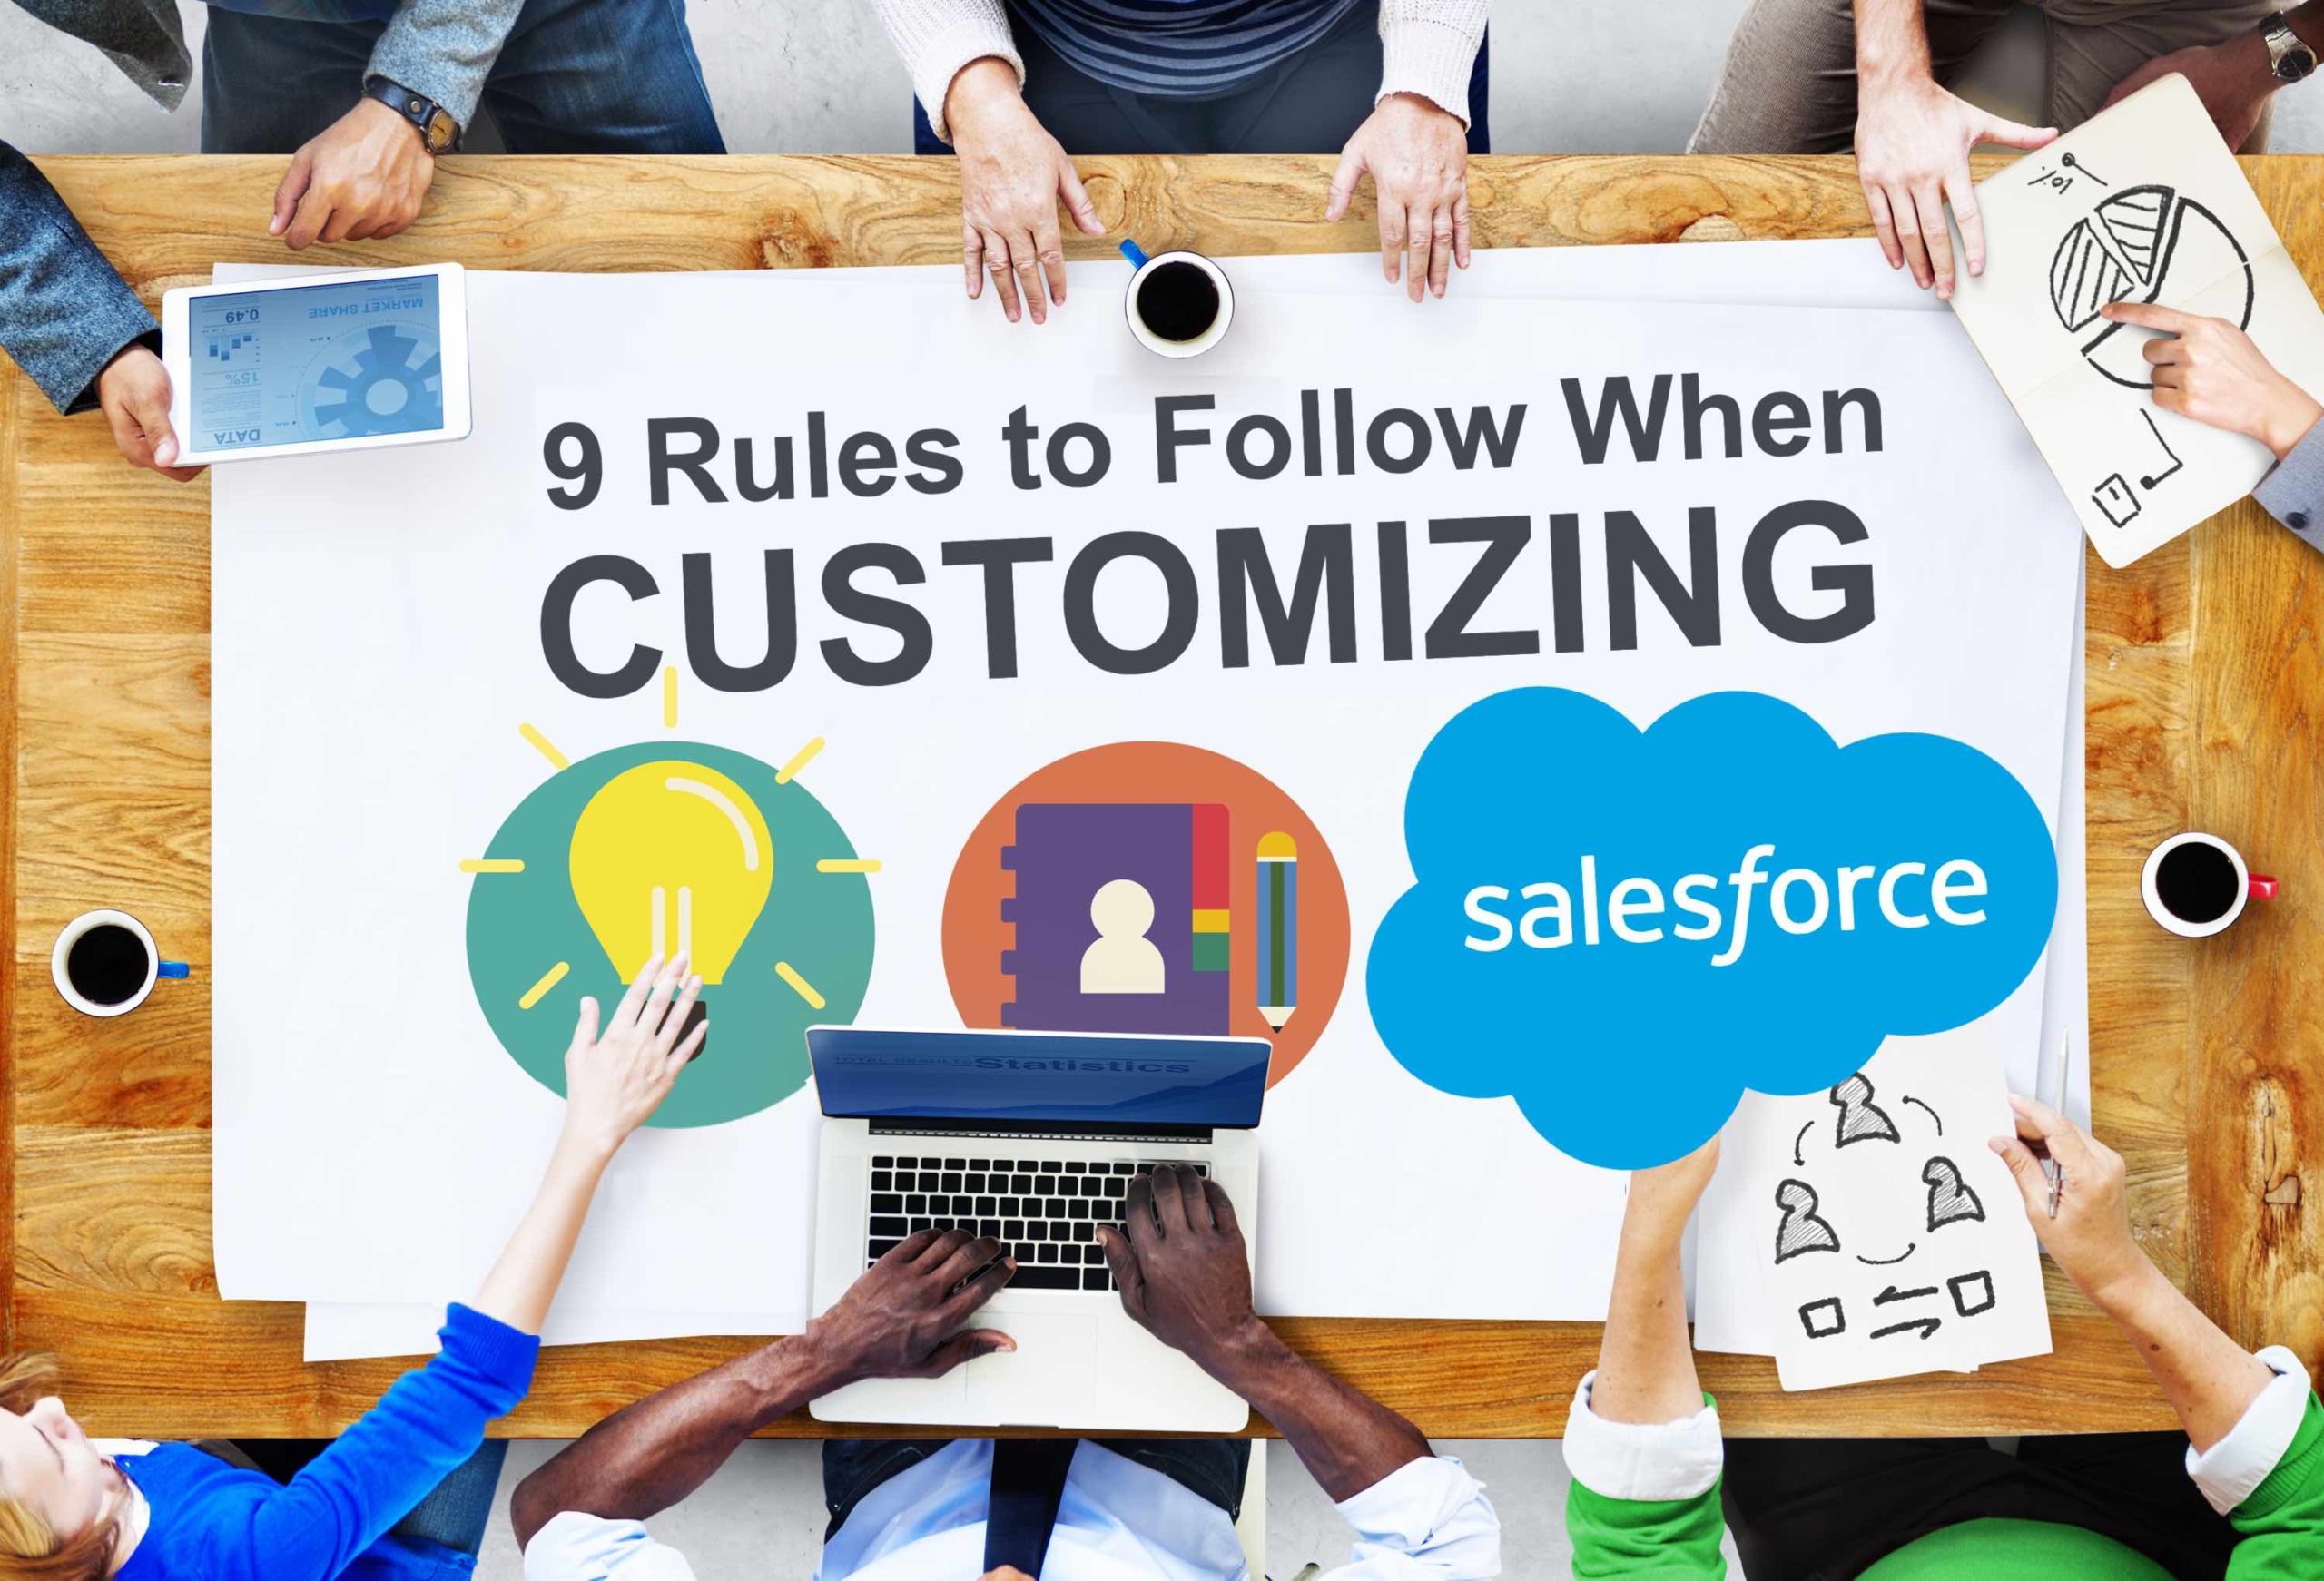 9 rules to follow when customizing salesforce